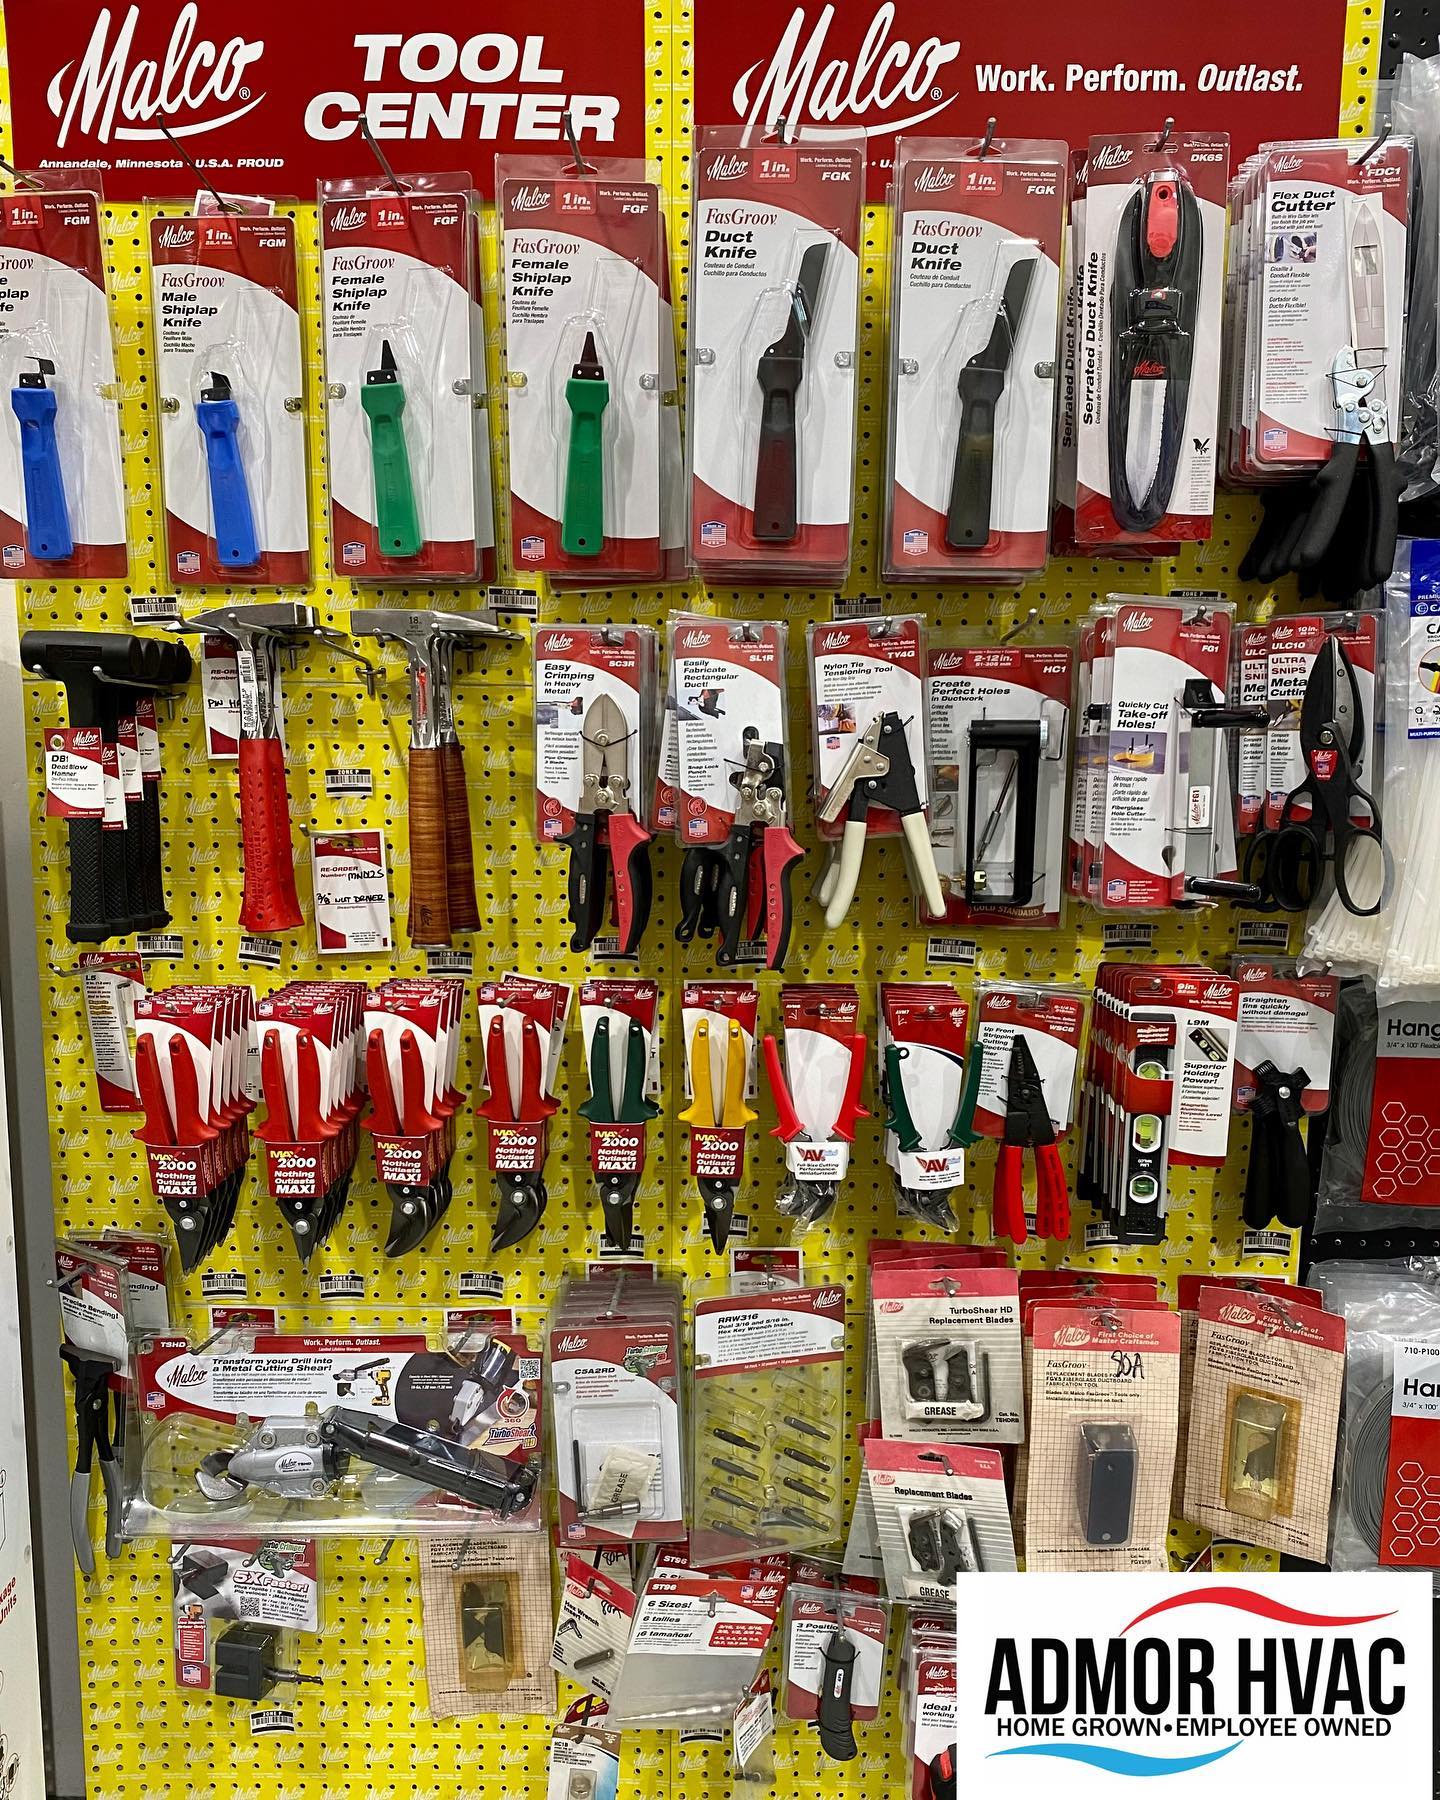 Visit our Malco Tool center and get the products you need to increase productivity and profits!
#hvactools #oahuhvac #mauihvac #kauaihvac #hawaiihvac #hawaiihvaccontractor #hawaiihvacsuperstore #hvactechnician #hvacowner #hvactech #hvacservice #hvacrepair #hvacinstall #sheetmetal #sheetmetalfabrication #sheetmetalfab #hvacinstallation #airconditioning #airconditioninginstallation #facilitymanagement